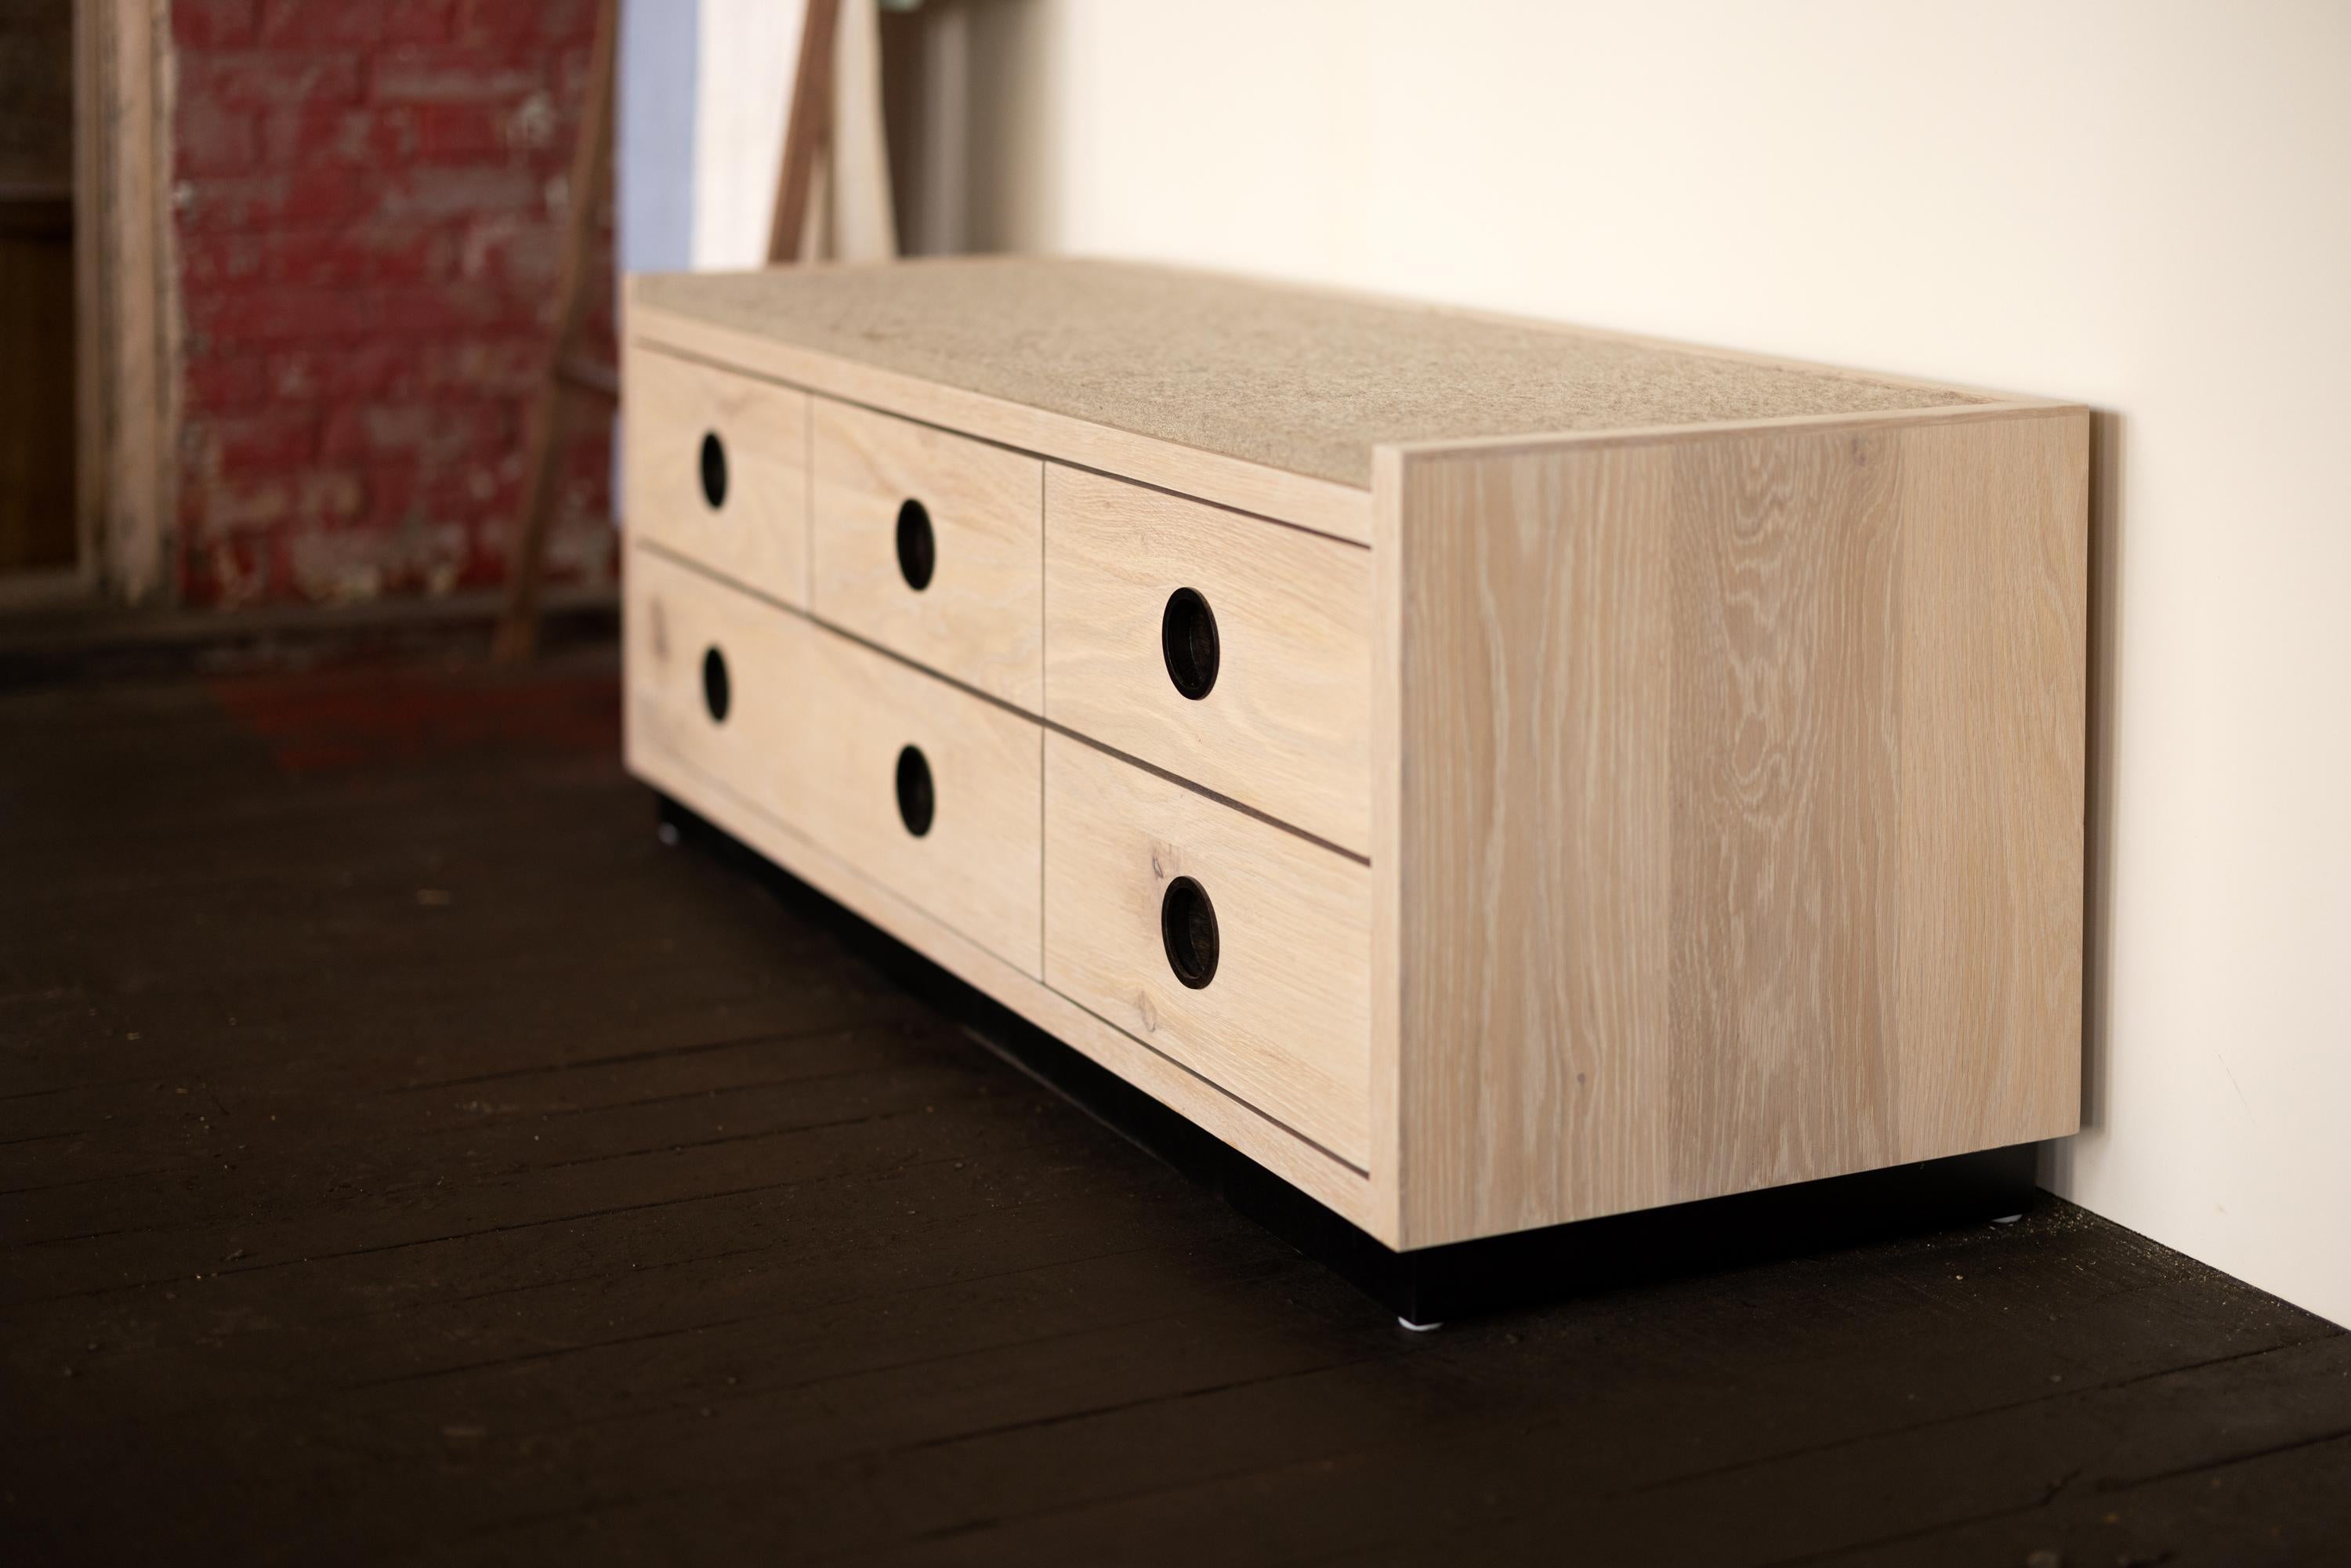 The Bank Storage Bench provides comfortable seating and discreet, organized storage. We craft the Bank Storage Bench with thick white oak and handmade, recessed, round walnut pulls. The thick felt top is low profile and comfortable.

This Wood &